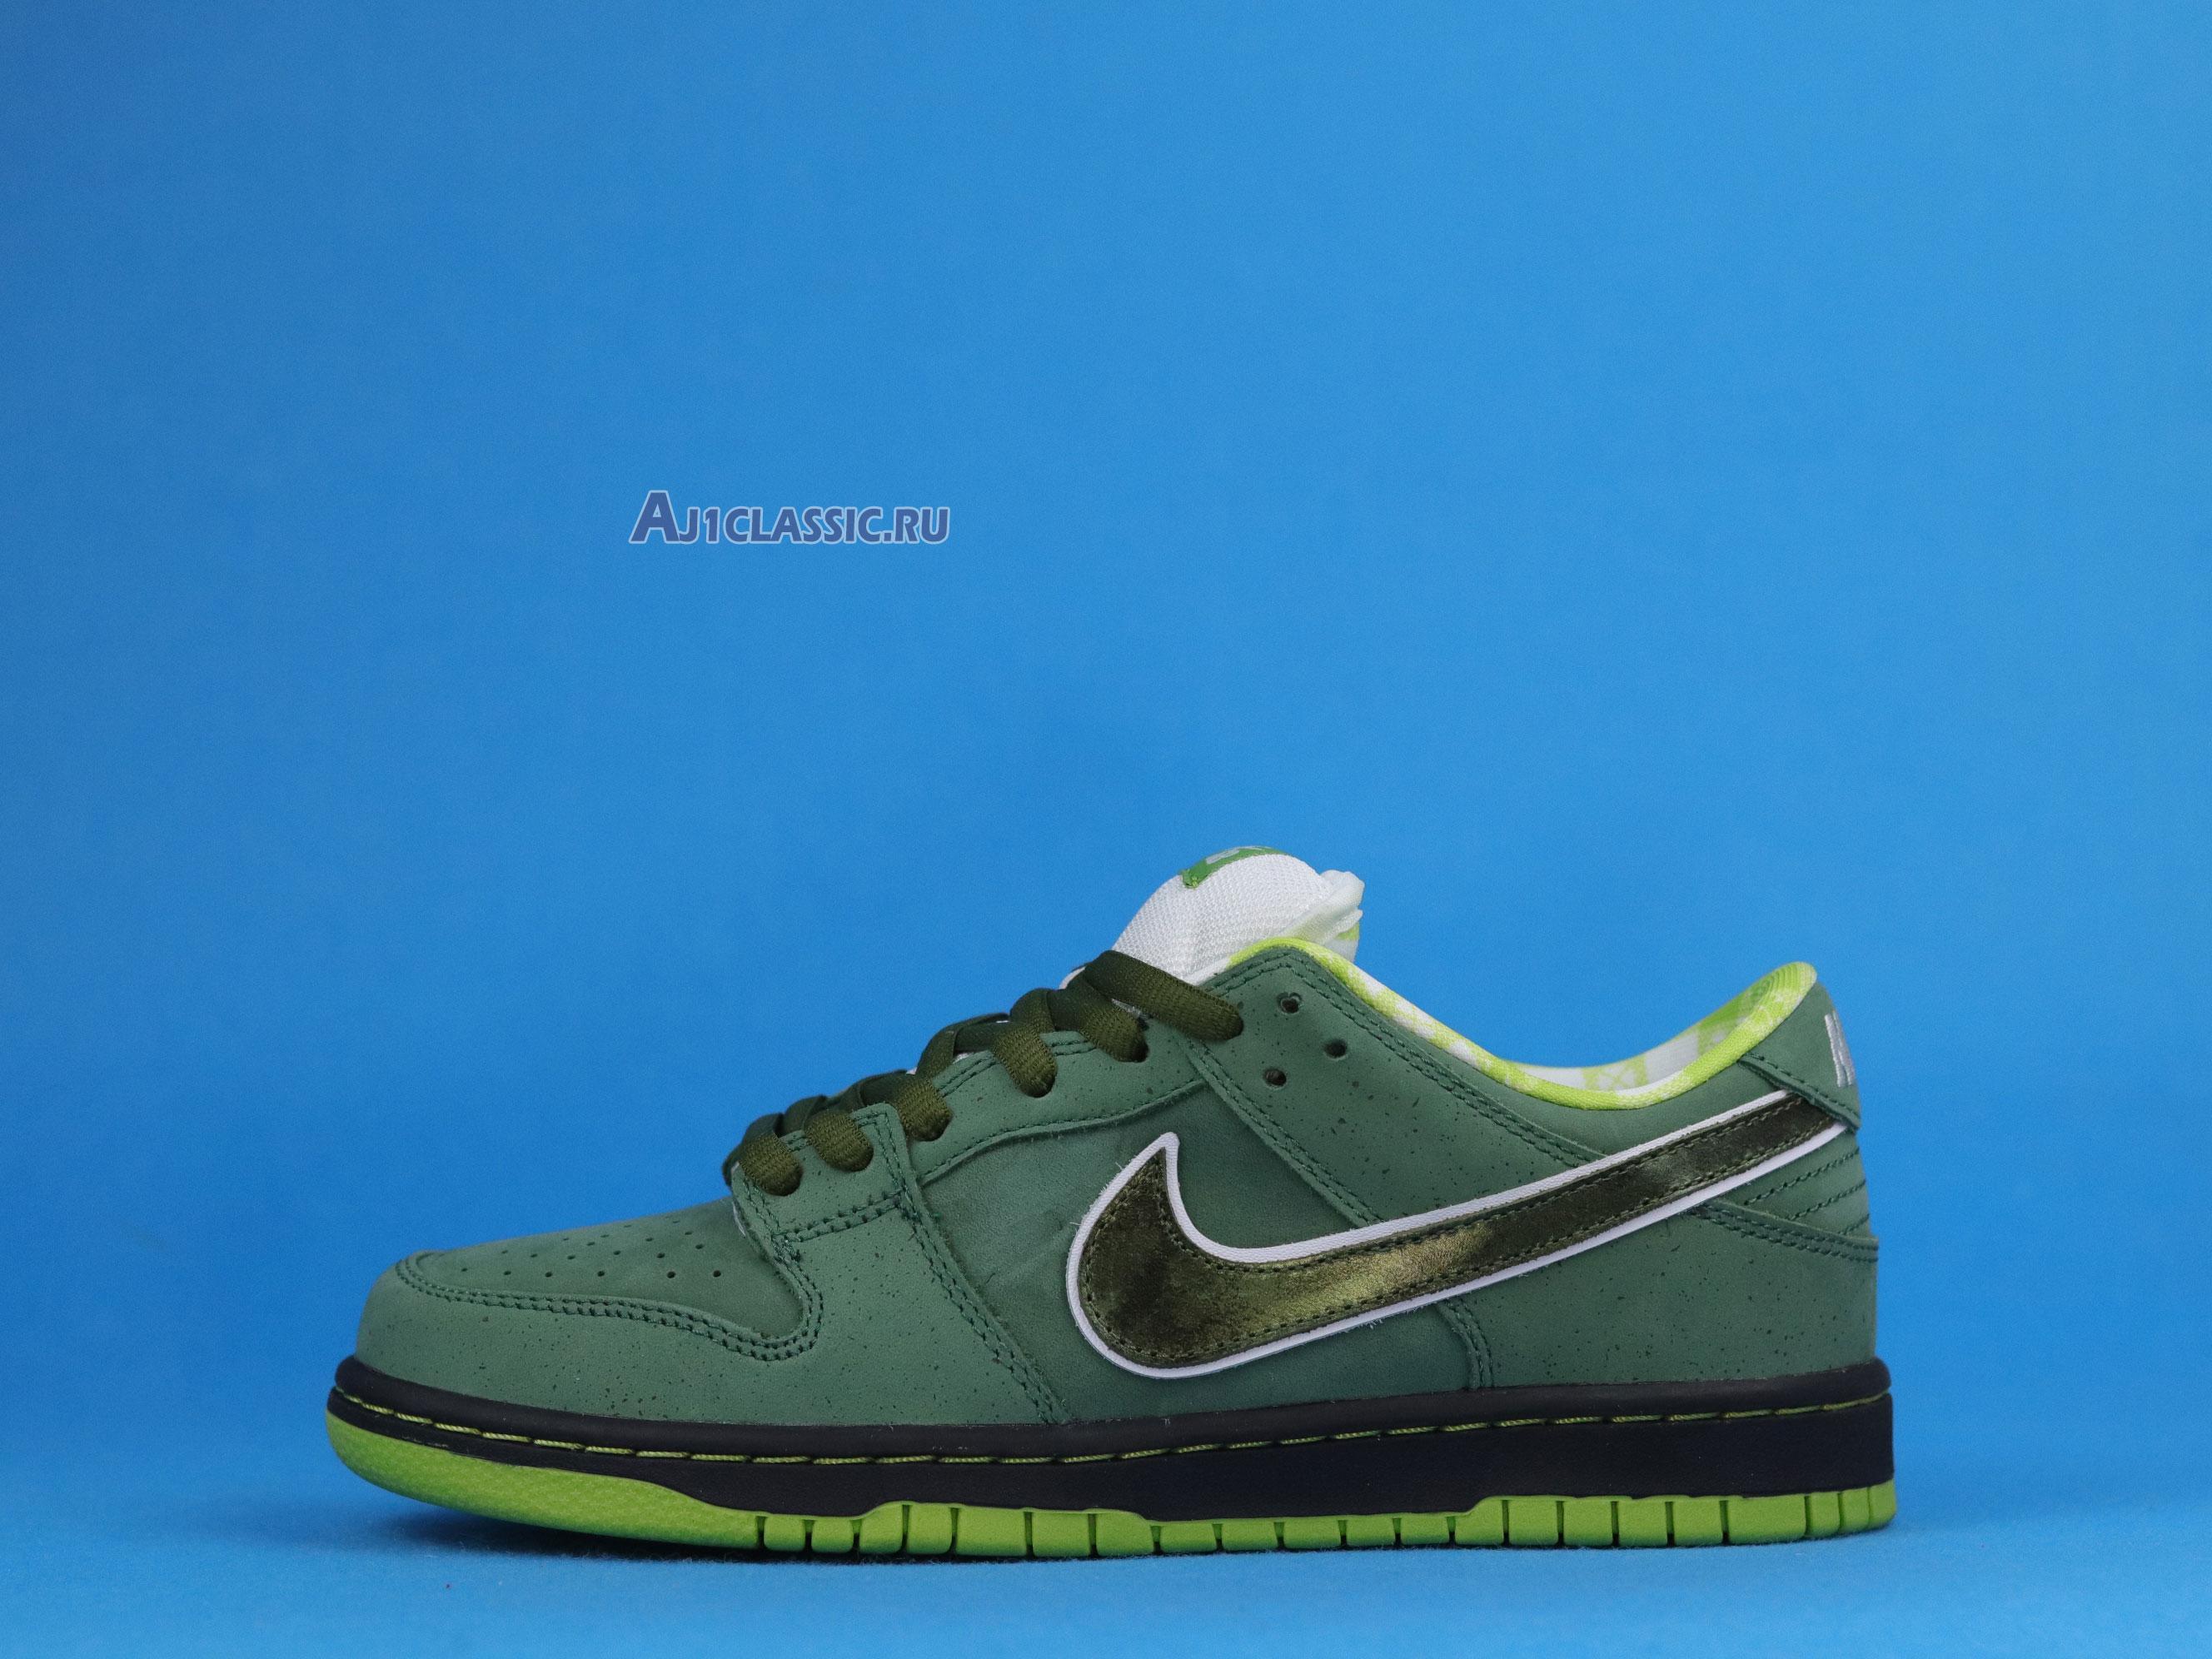 Concepts x Nike Dunk Low SB "Green Lobster" BV1310-337-02